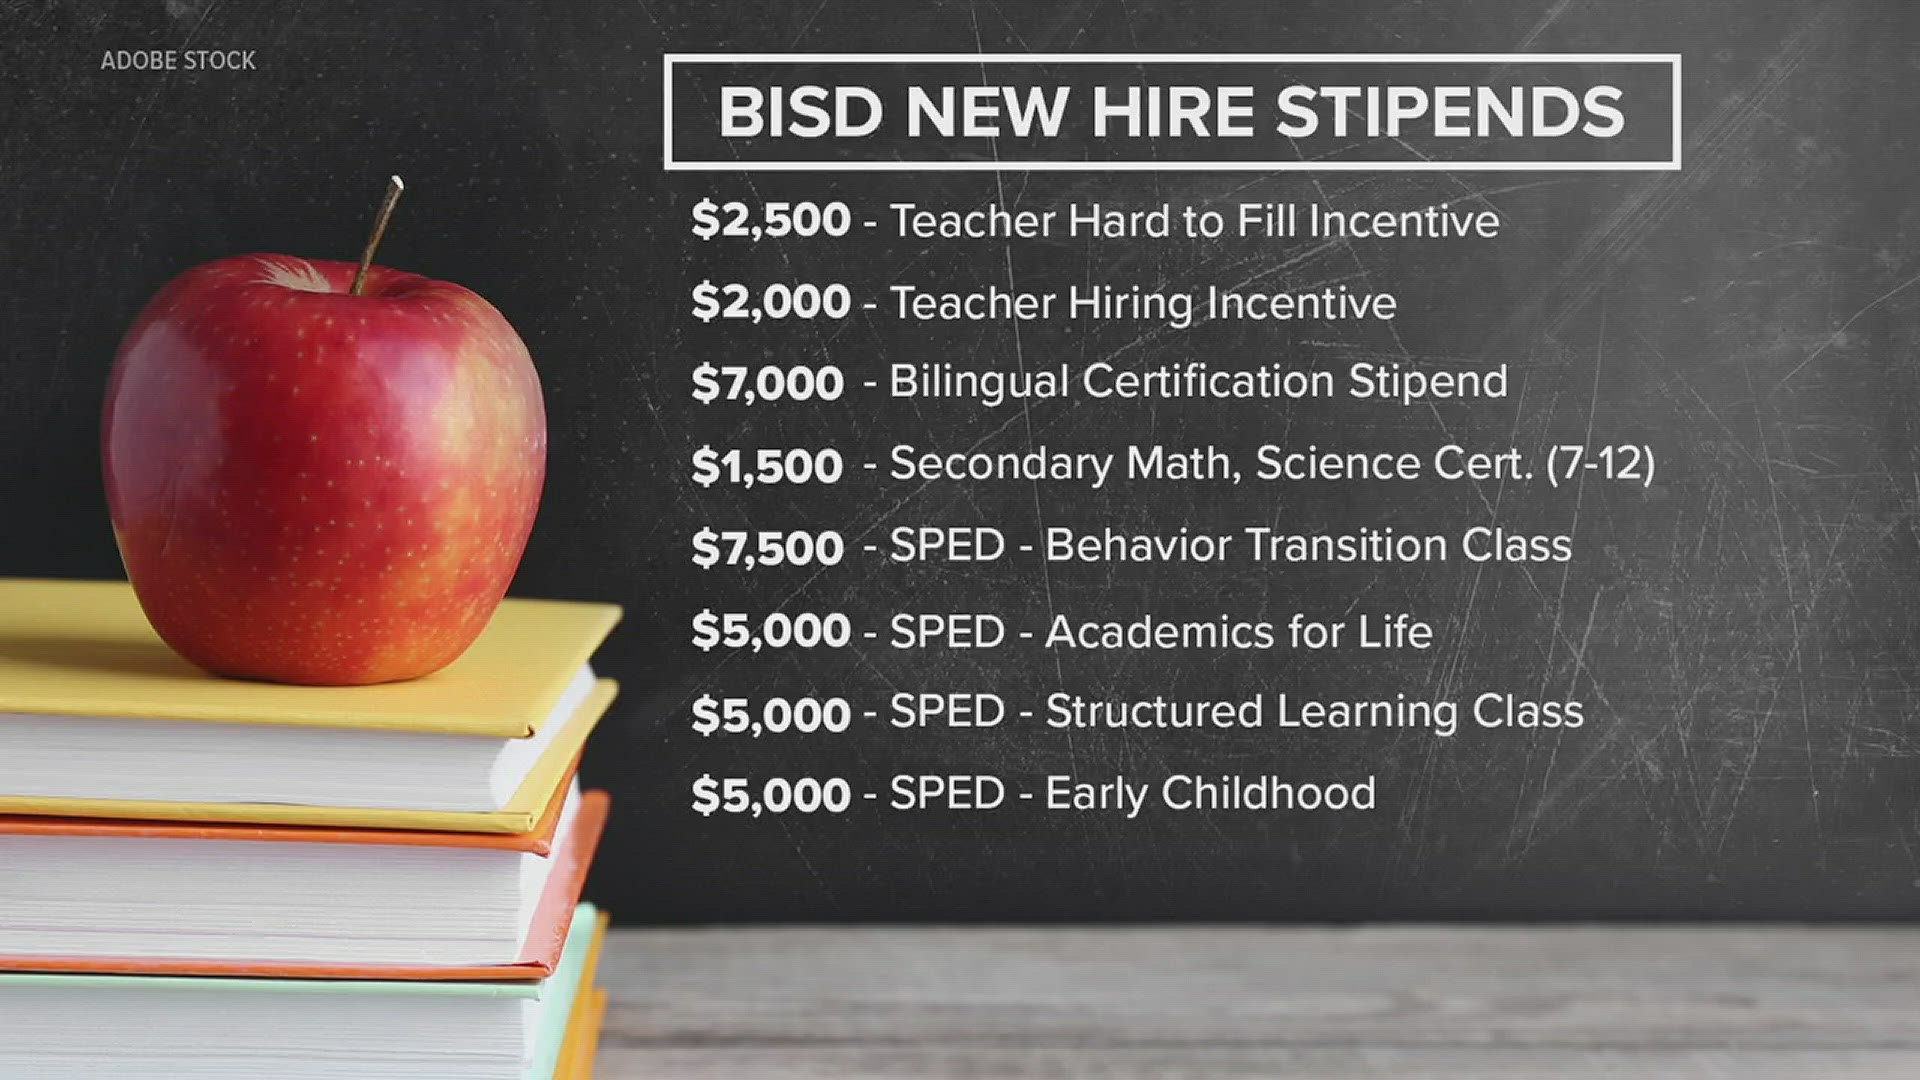 Teachers who meet specific criteria can qualify for hiring incentives ranging from $1,500 to $7,500.